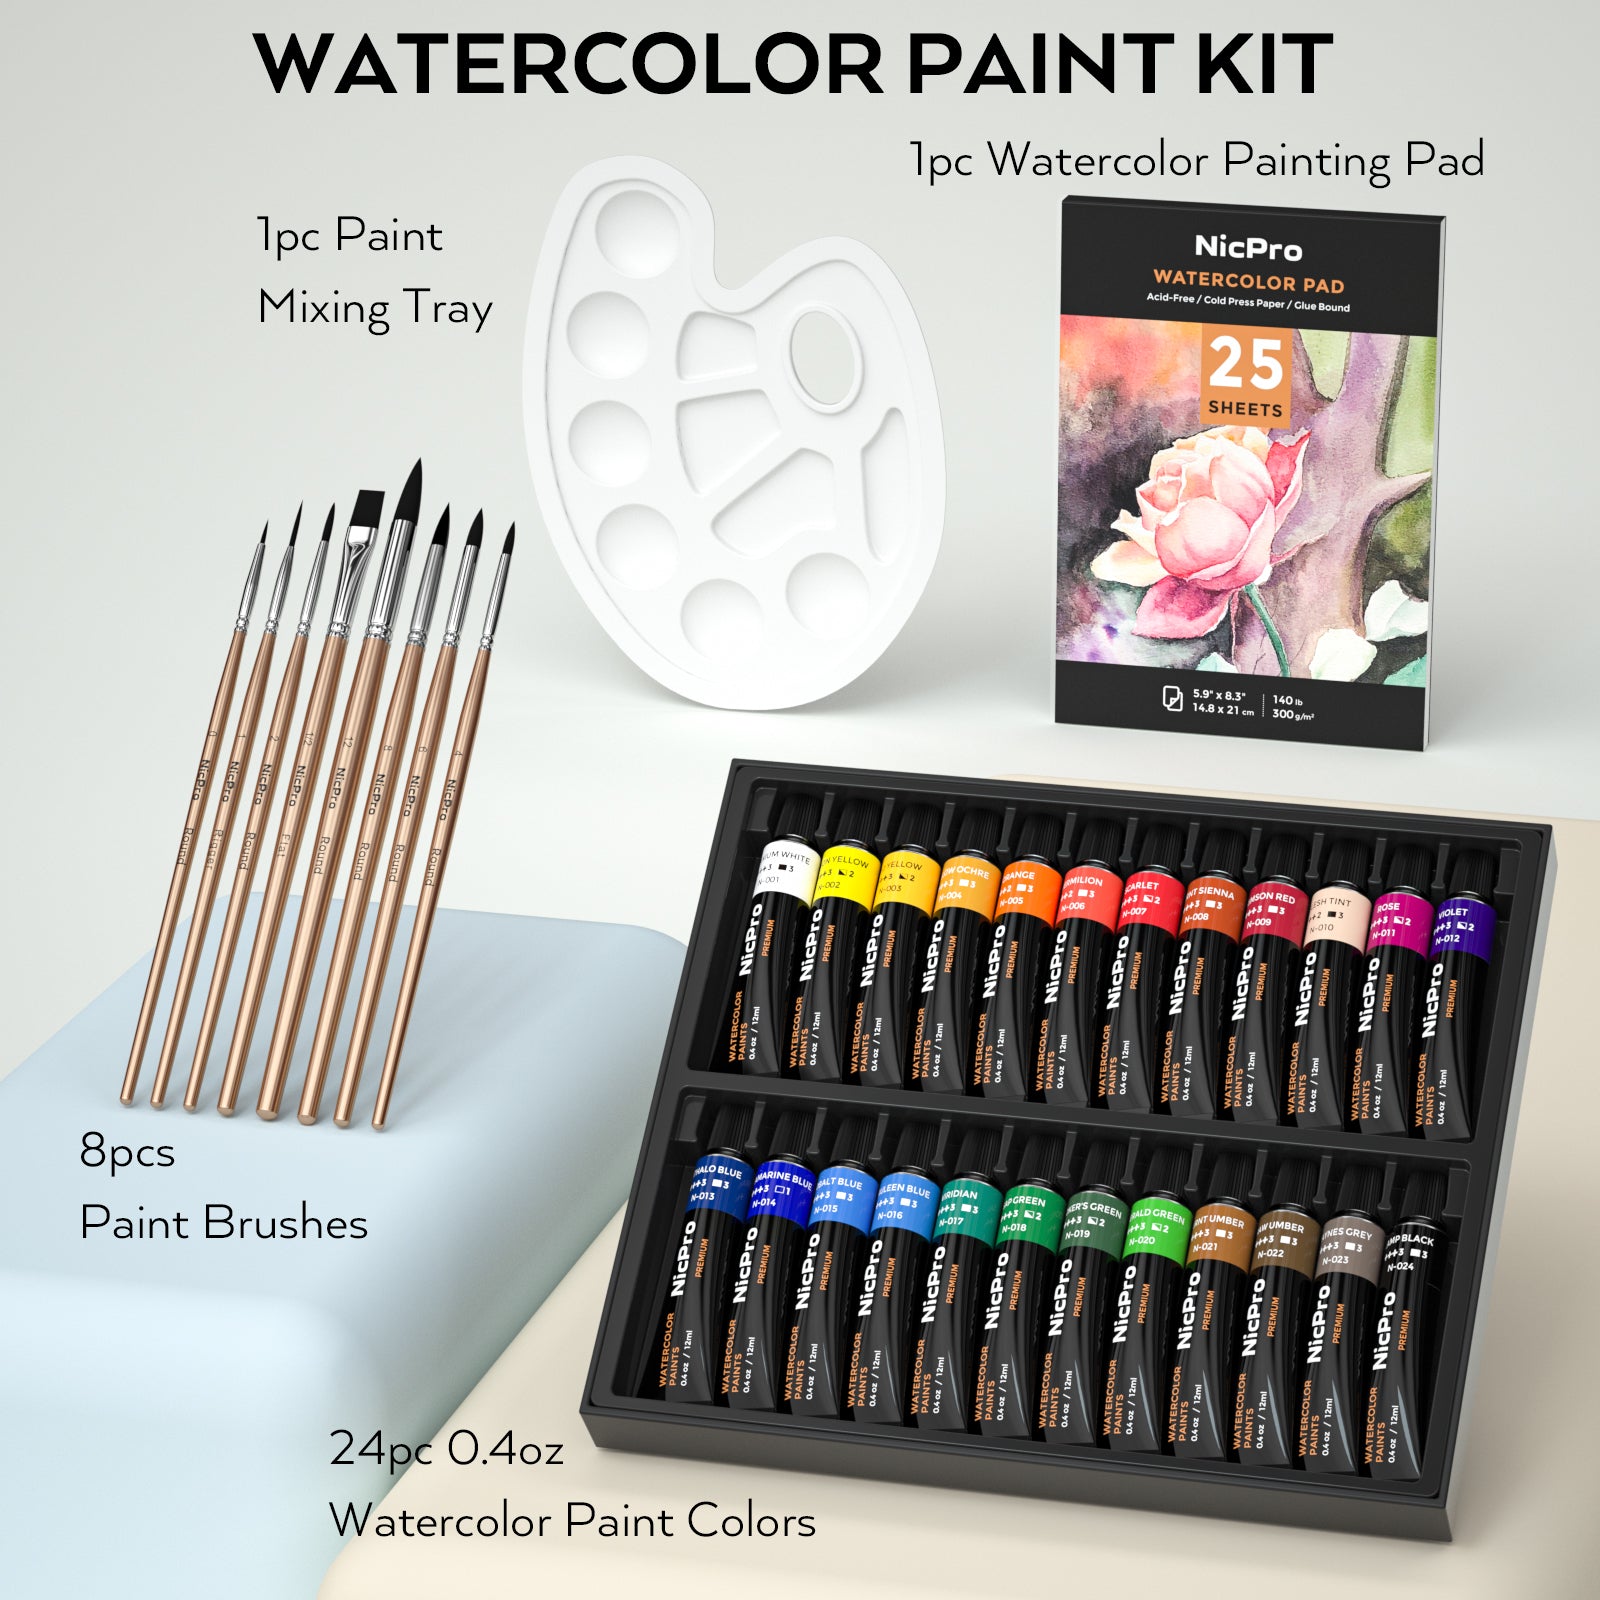 glokers Watercolor Paint Set 24 Colors Arts and Craft Supplies Includes 3  Professional Paint Brushes, 1 Paint Palette - Water Colors Painting Art Kit